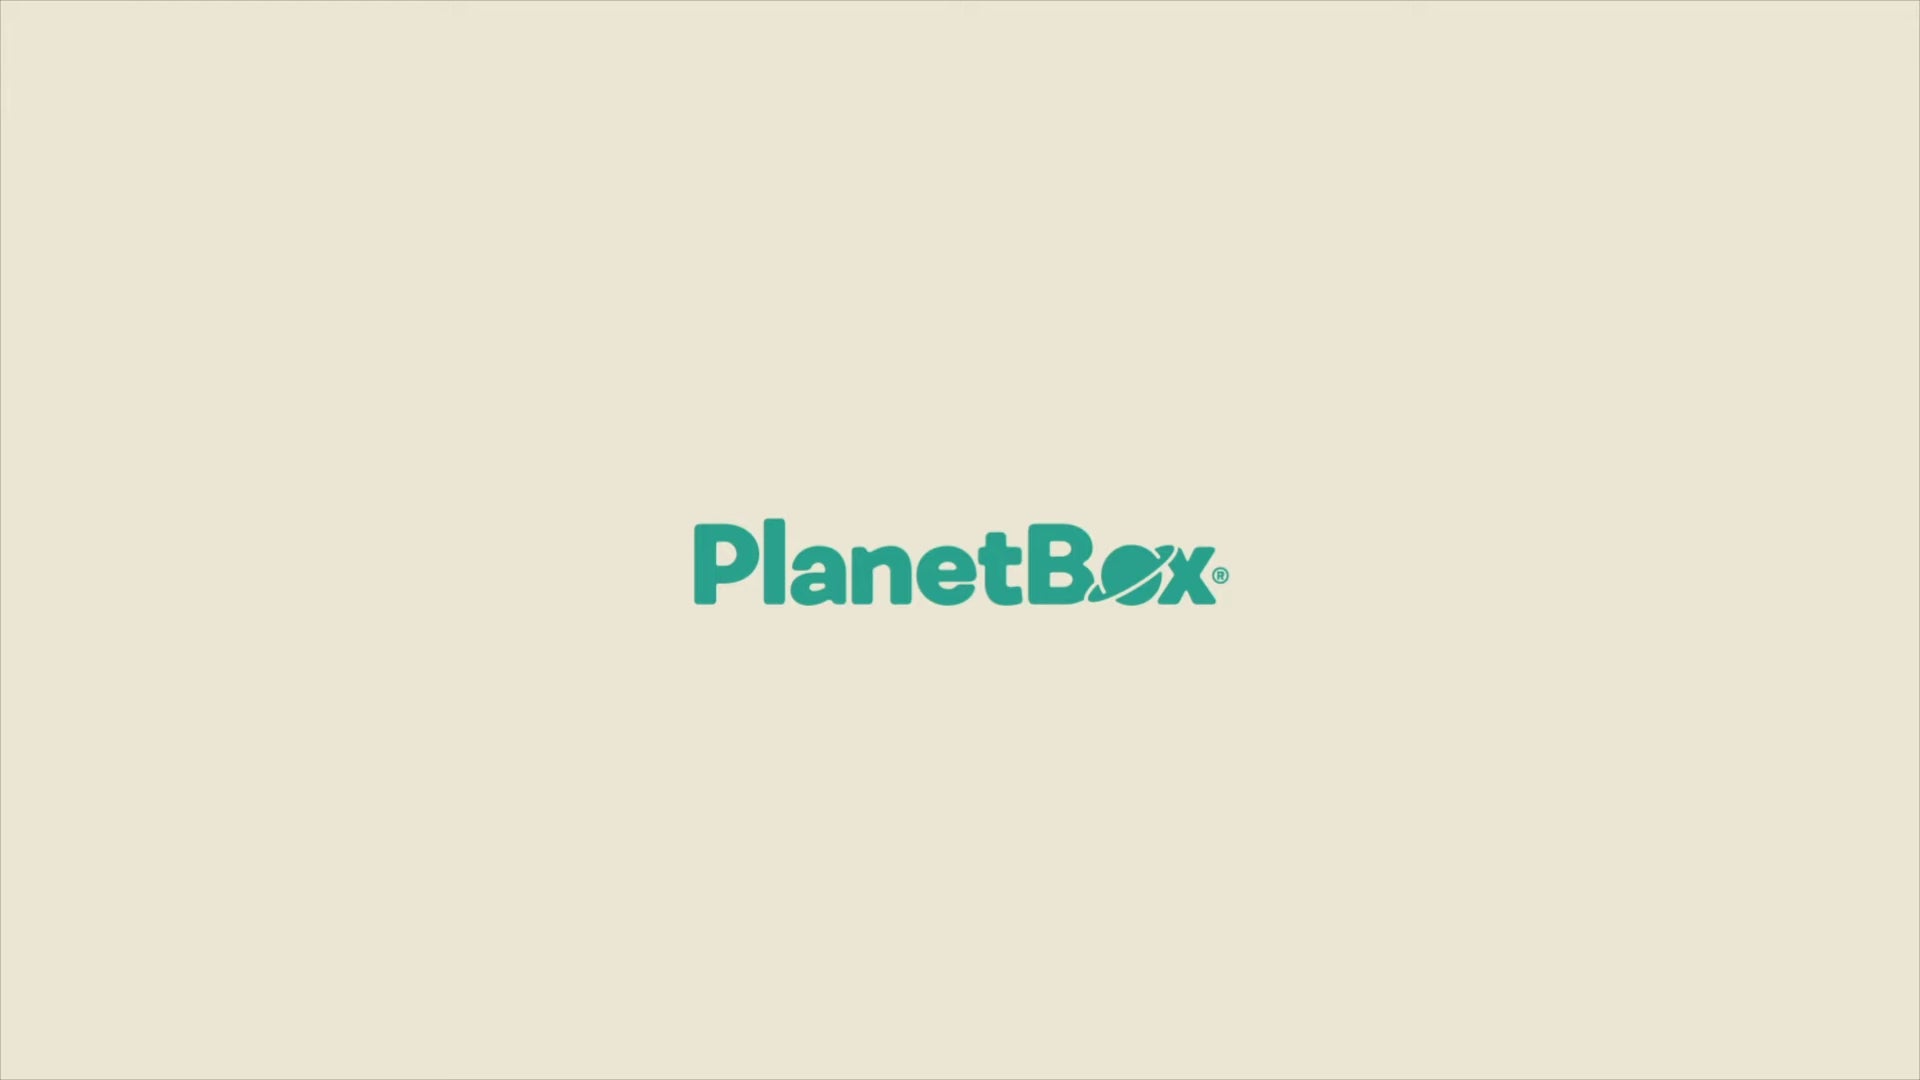 PlanetBox Stainless Steel Lunchbox, Launch